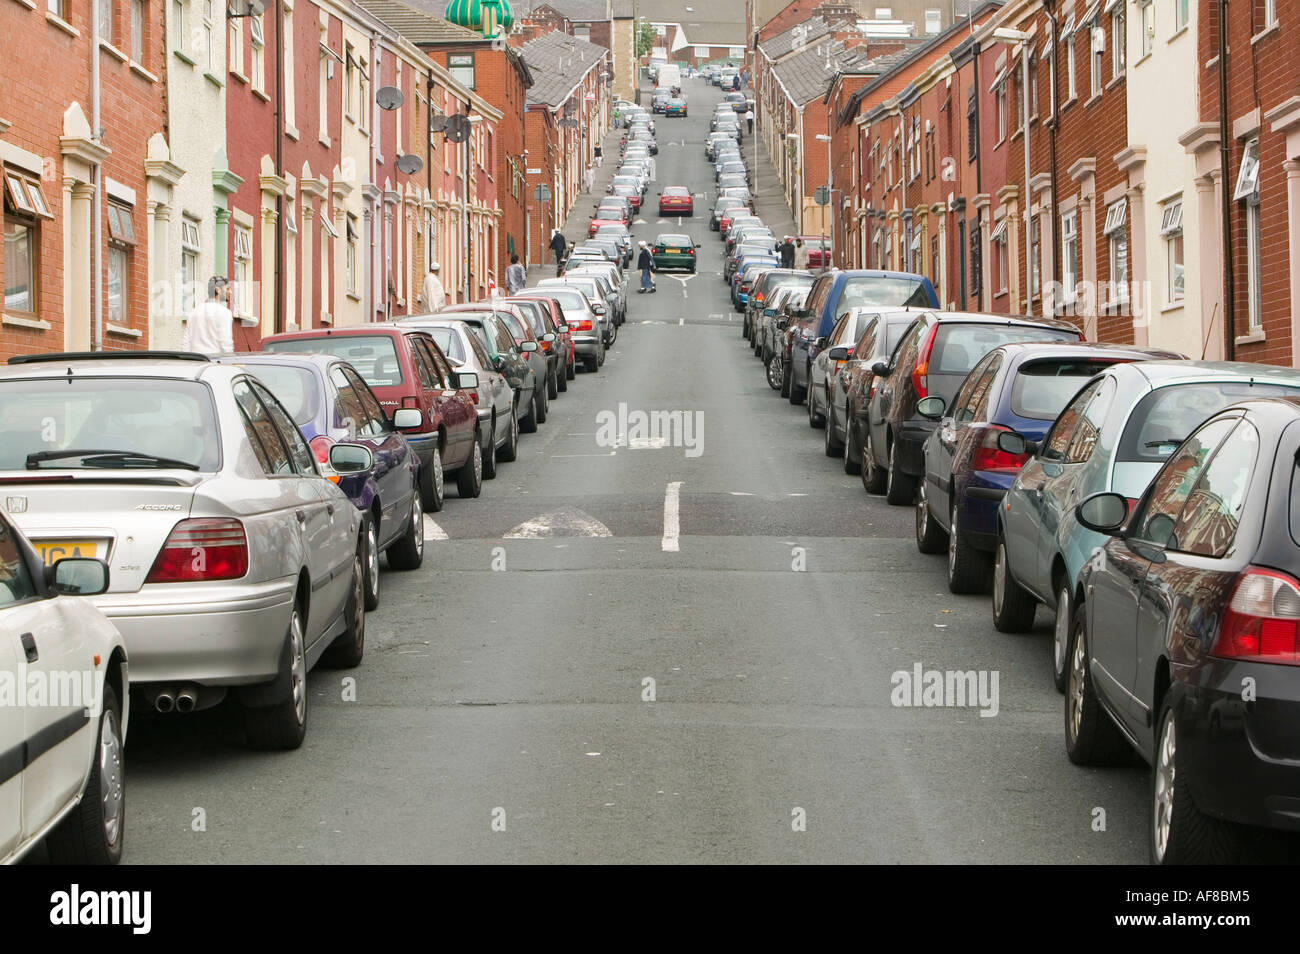 an overcrowded muslim area of blackburn, Lancashire, UK, with cars parked all along the street Stock Photo